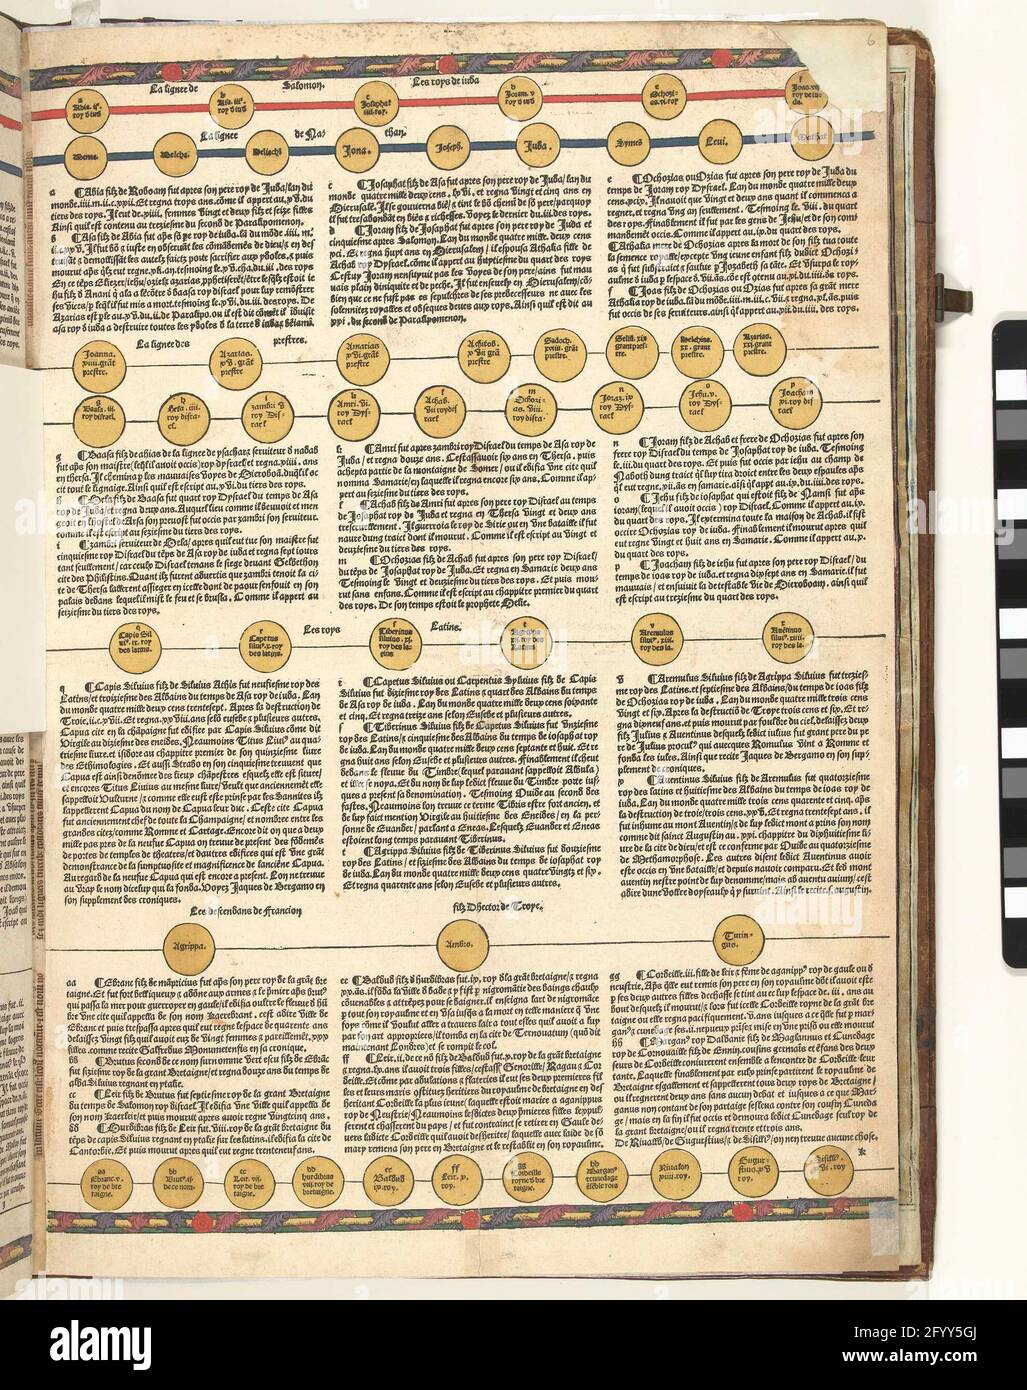 Cronica cronicarum (...), leaf 6 recto. Leaf 6 recto of a world bony. Text in bookpress in French in three columns. Round circles are filled with names: these together form a schematic representation of genealogy and precept succession, which extends over several pages of the chronicle. Stock Photo